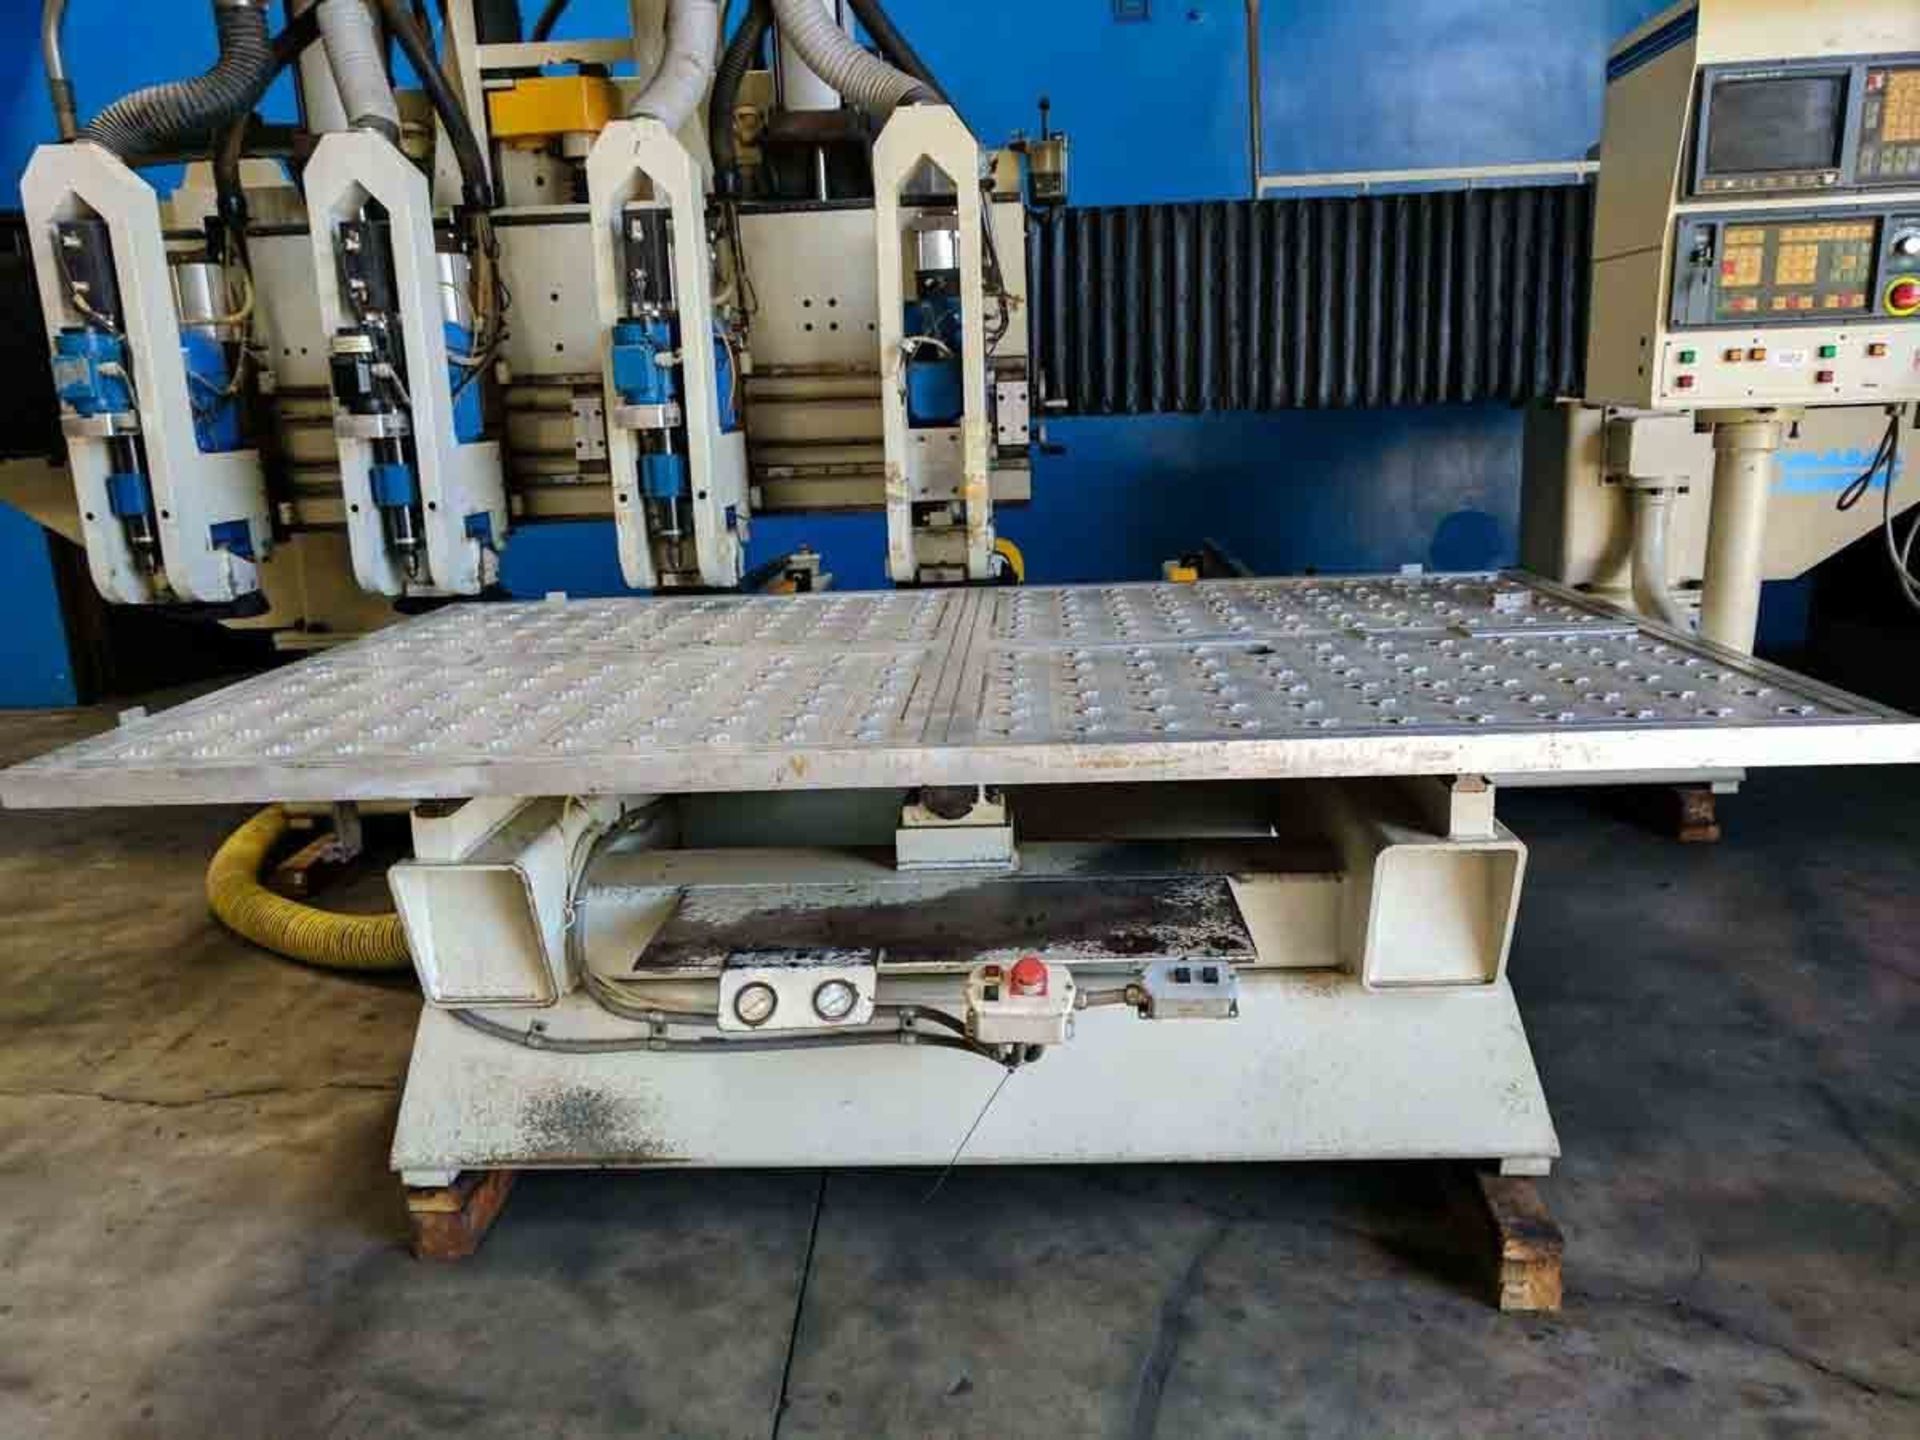 Komo VR805Q Fanuc CNC Metal Router 3 Axis 4 Spindle 96" x 60" Sheet Size - Located In: Huntington - Image 20 of 25